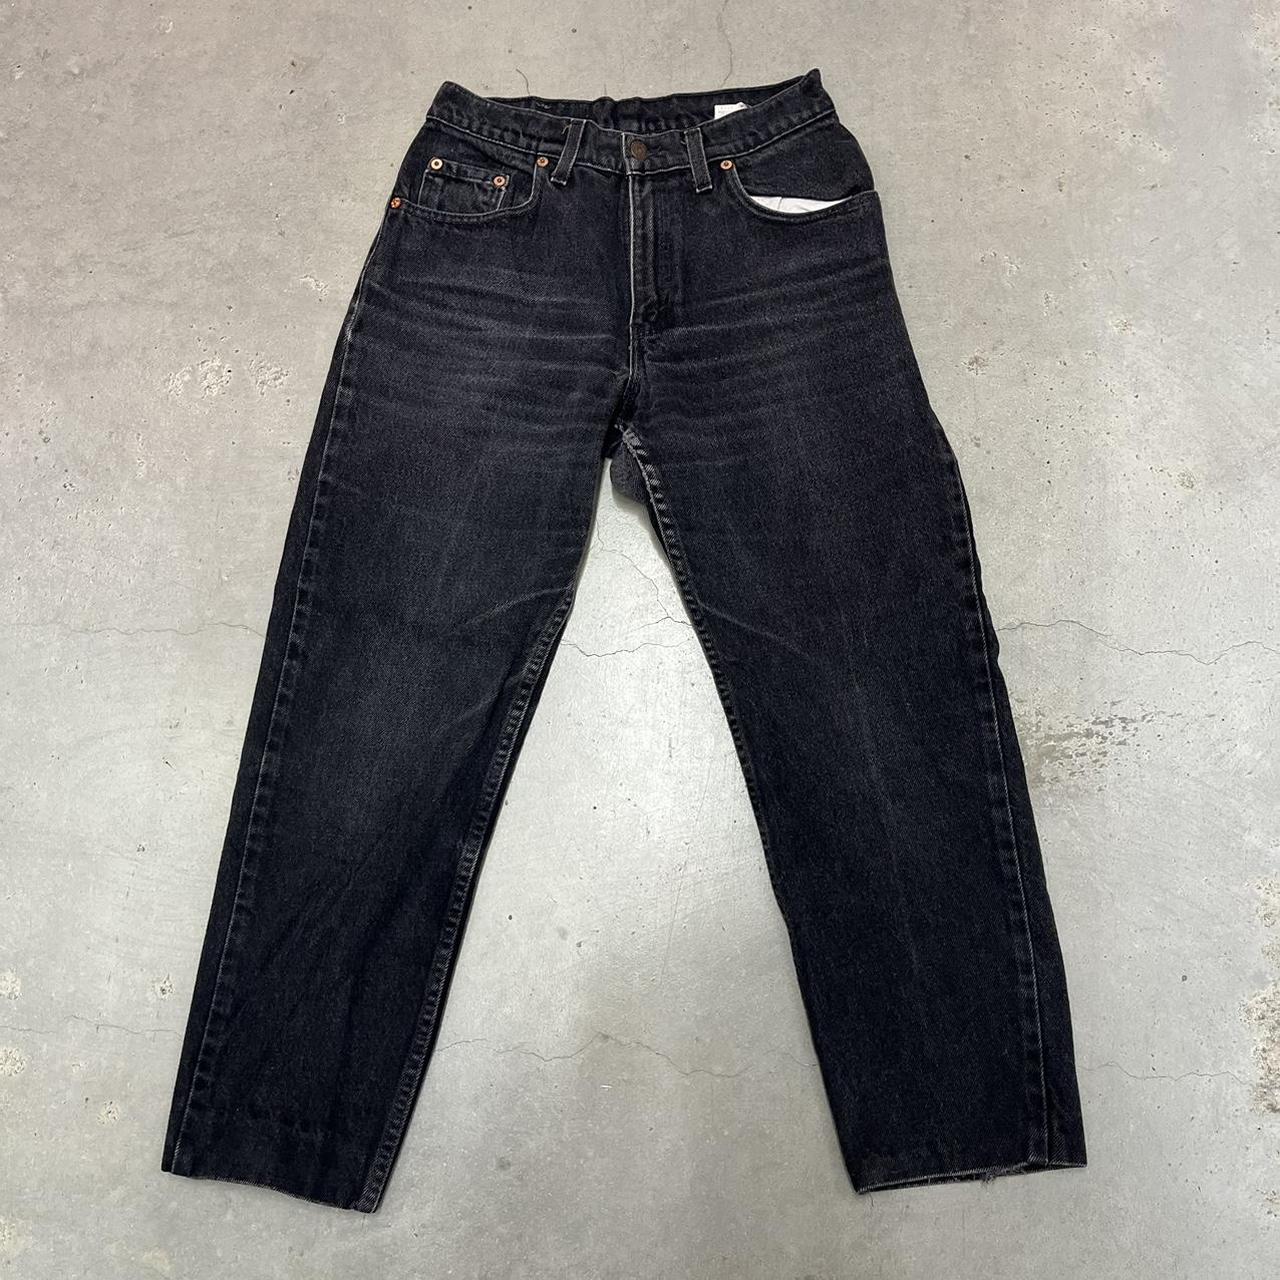 Vintage 90s Levi’s 550 black jeans made in USA...